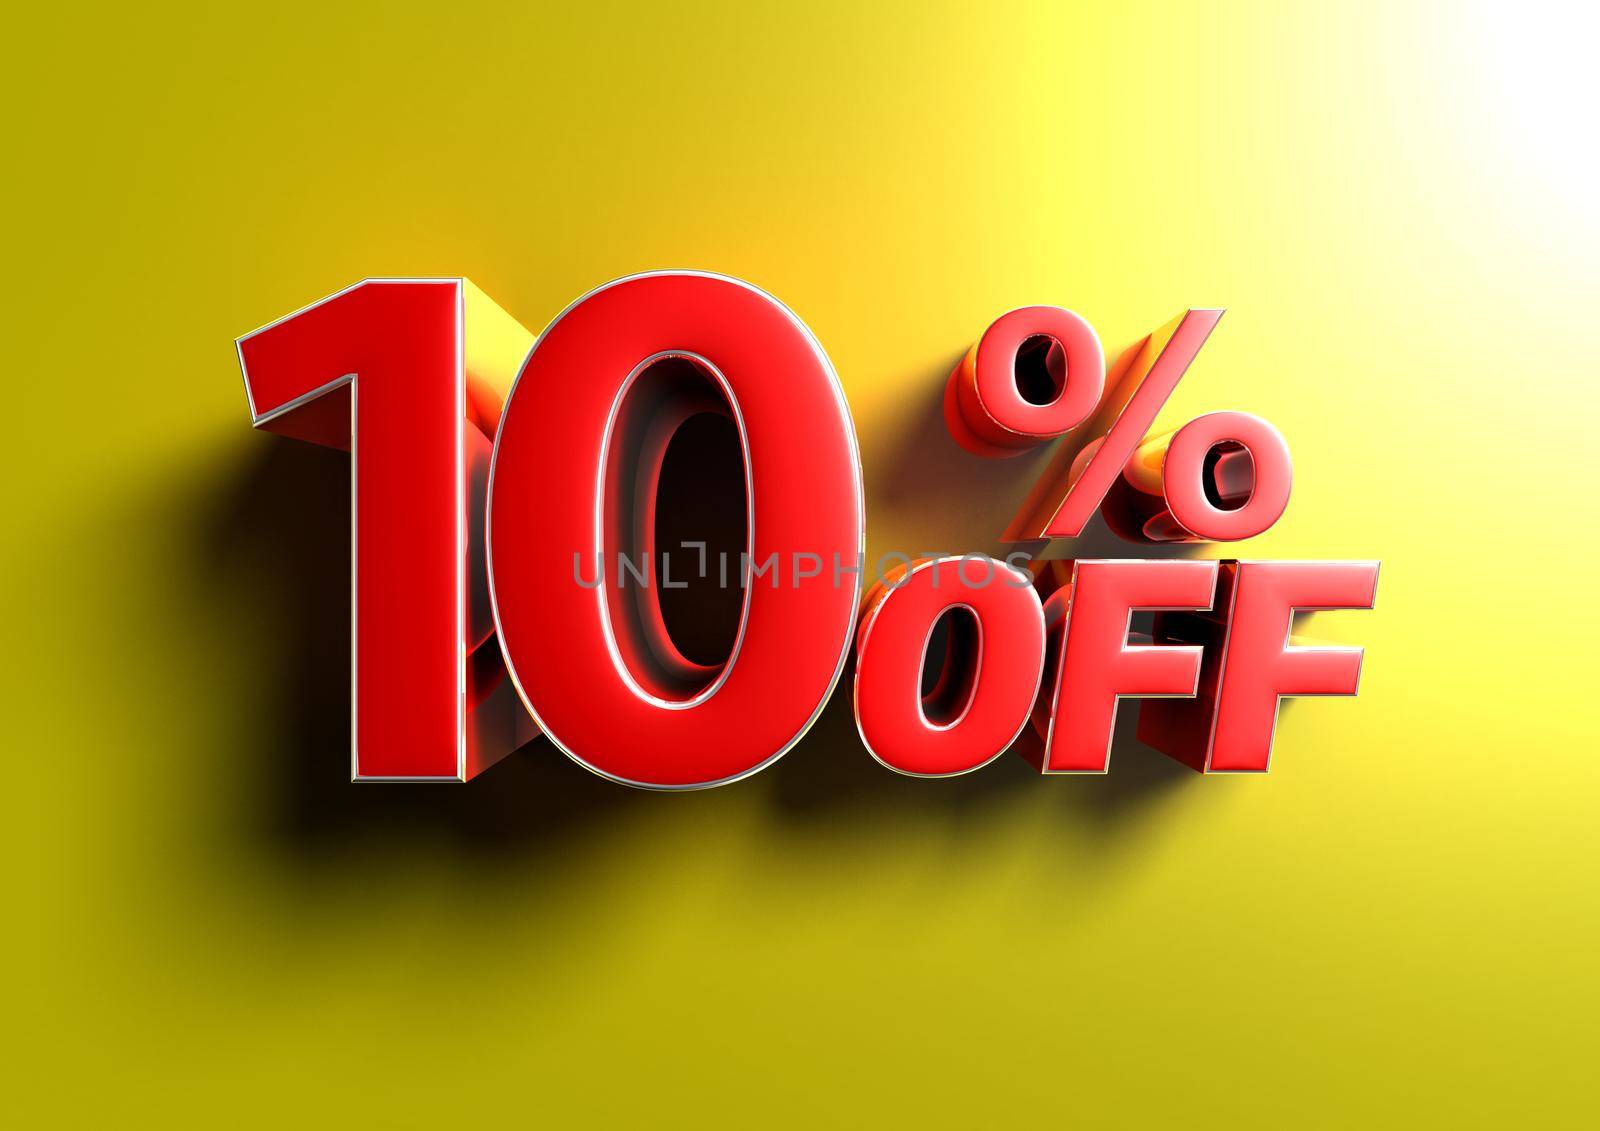 10 Percent off 3d illustration Sign on yellow background. by thitimontoyai